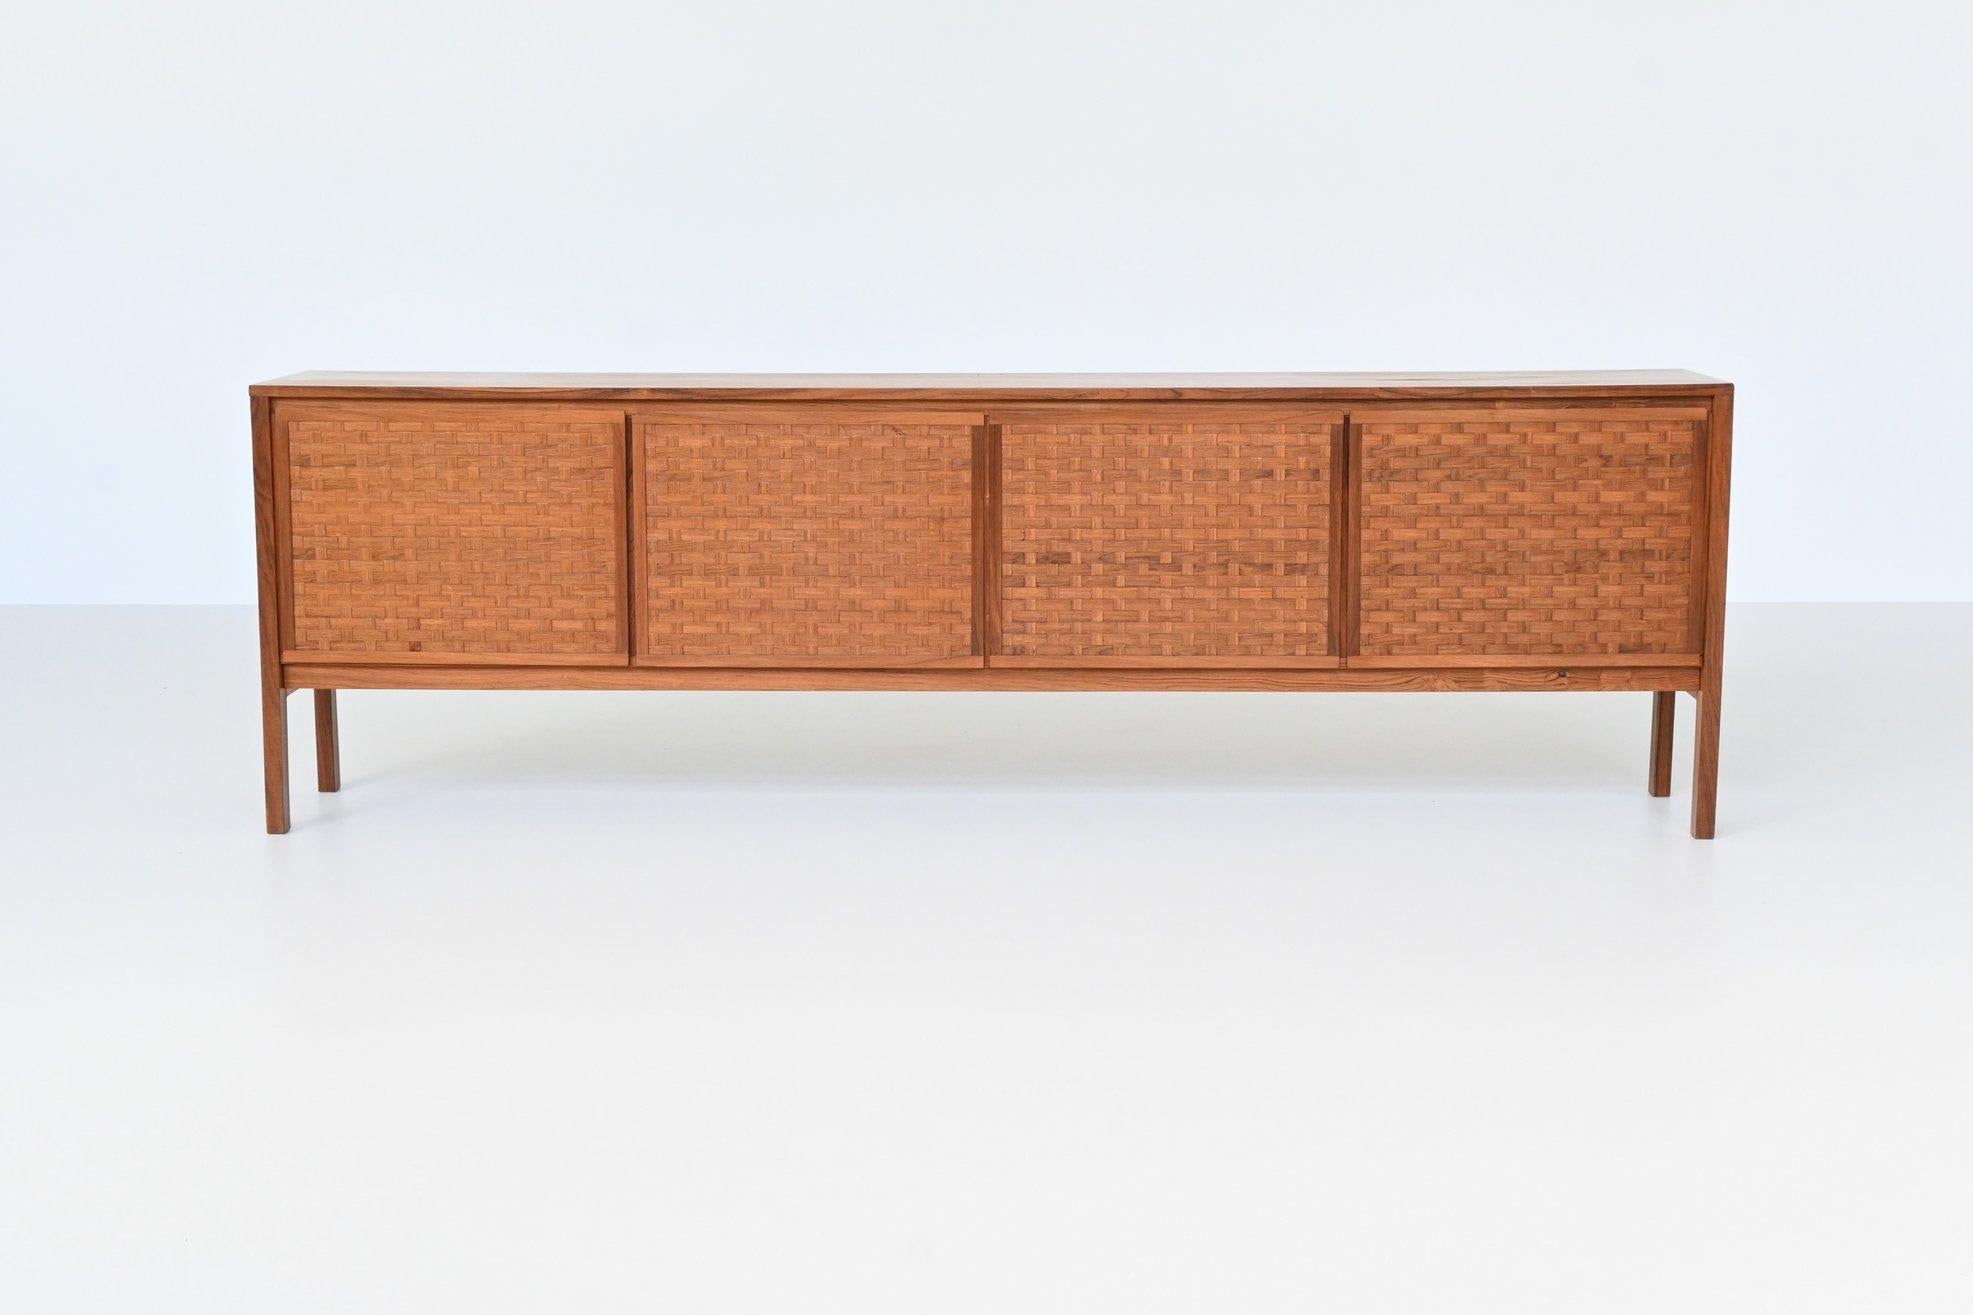 Stunning sideboard designed by Leo Bub for Bub Wertmöbel, Germany 1960. This beautiful symmetric cabinet is made in nicely grained rosewood. It has four doors with shelves behind and there are four white lacquered drawers behind a door. The doors